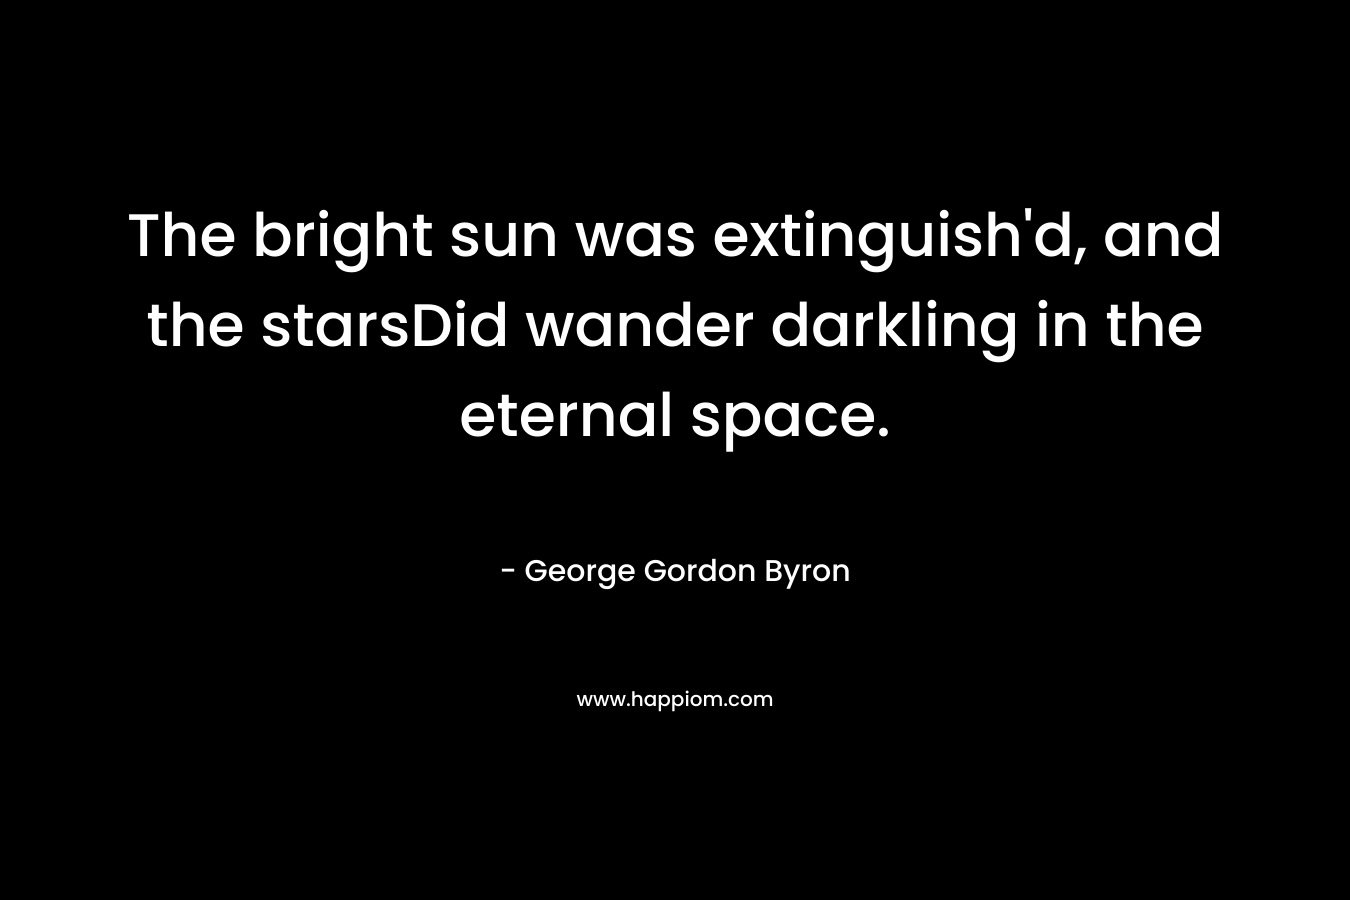 The bright sun was extinguish'd, and the starsDid wander darkling in the eternal space.